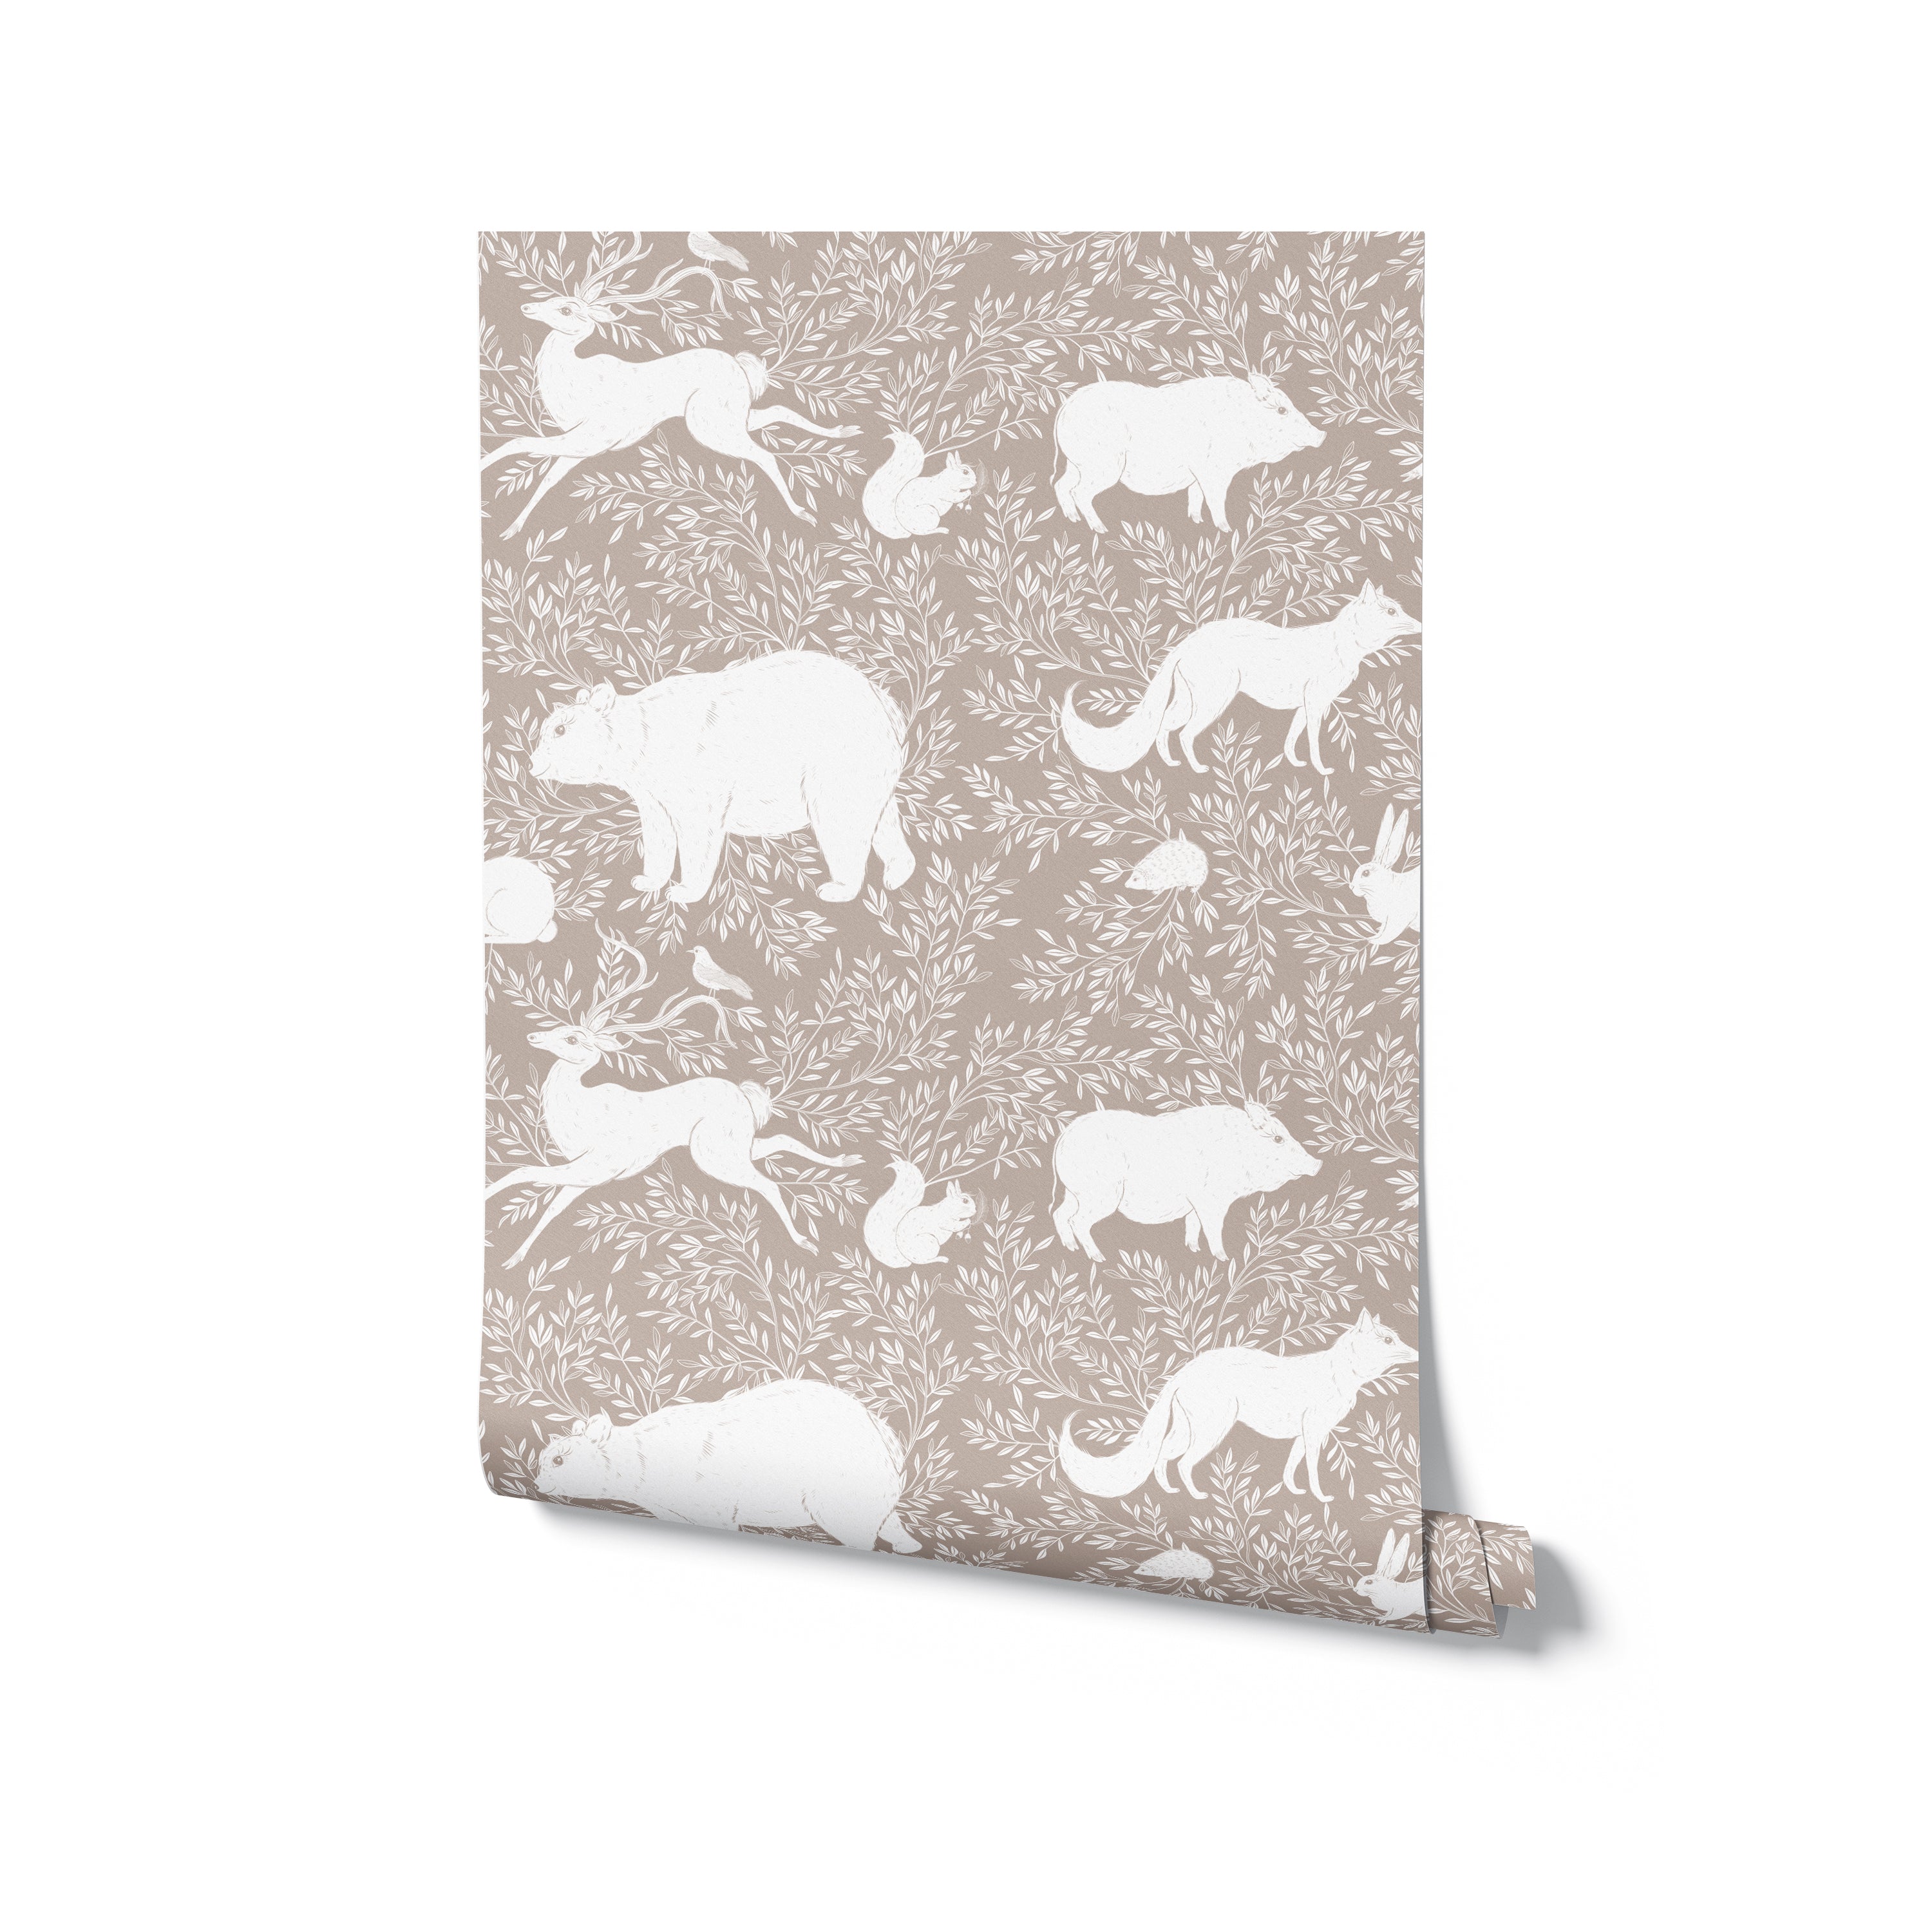 A roll of beige wallpaper showcasing a pattern of white woodland animals like bears, foxes, and rabbits, creating a charming and nature-inspired design suitable for various interior settings